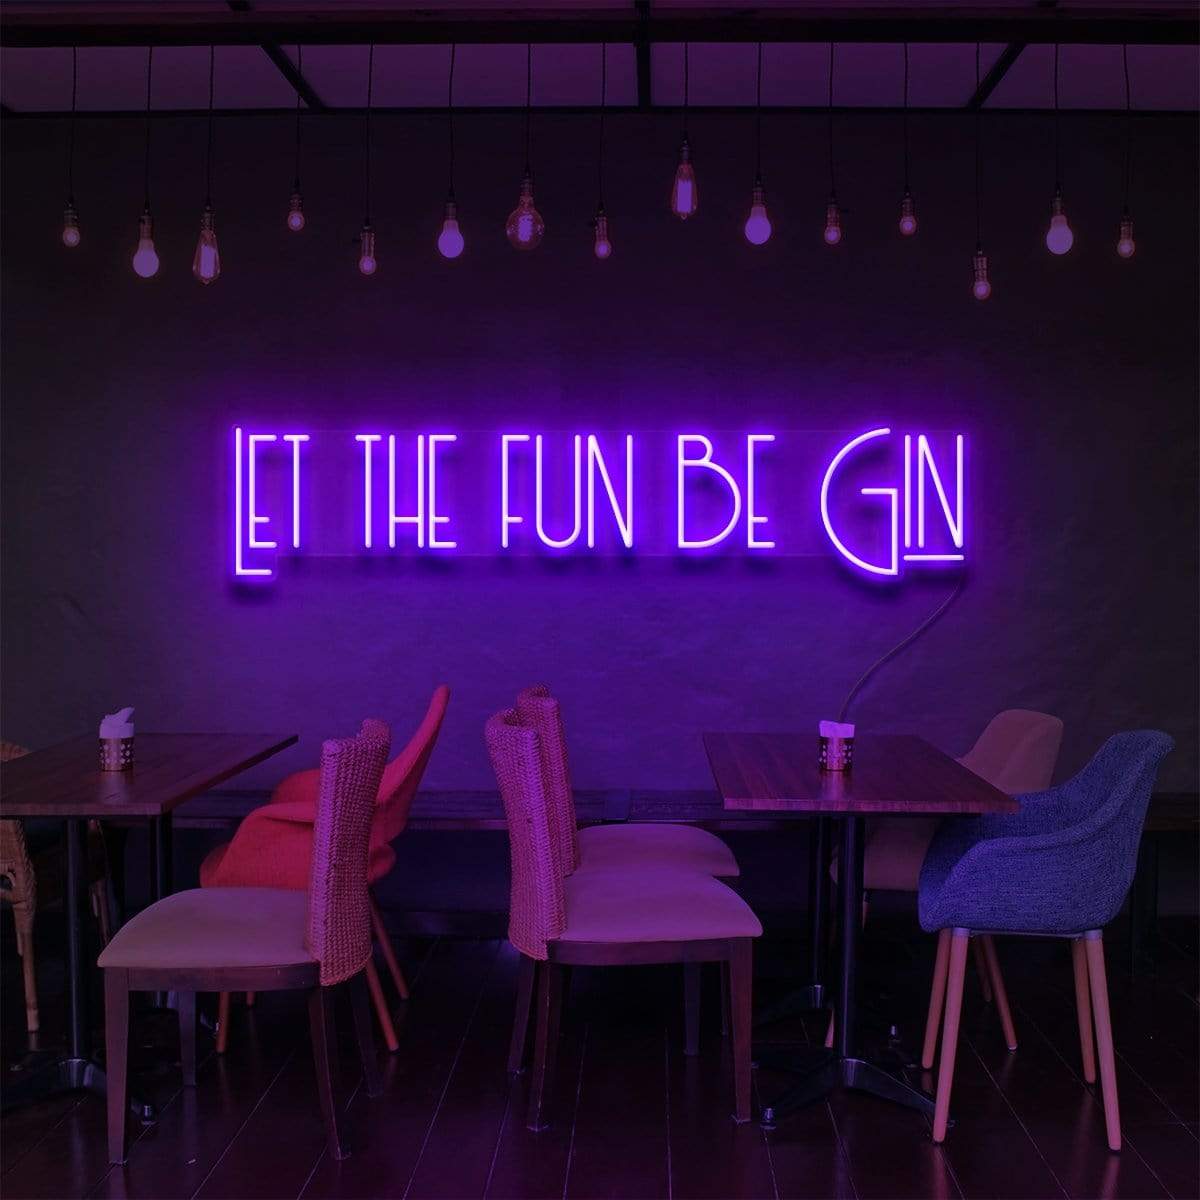 "Let The Fun Be Gin" Neon Sign for Bars & Restaurants